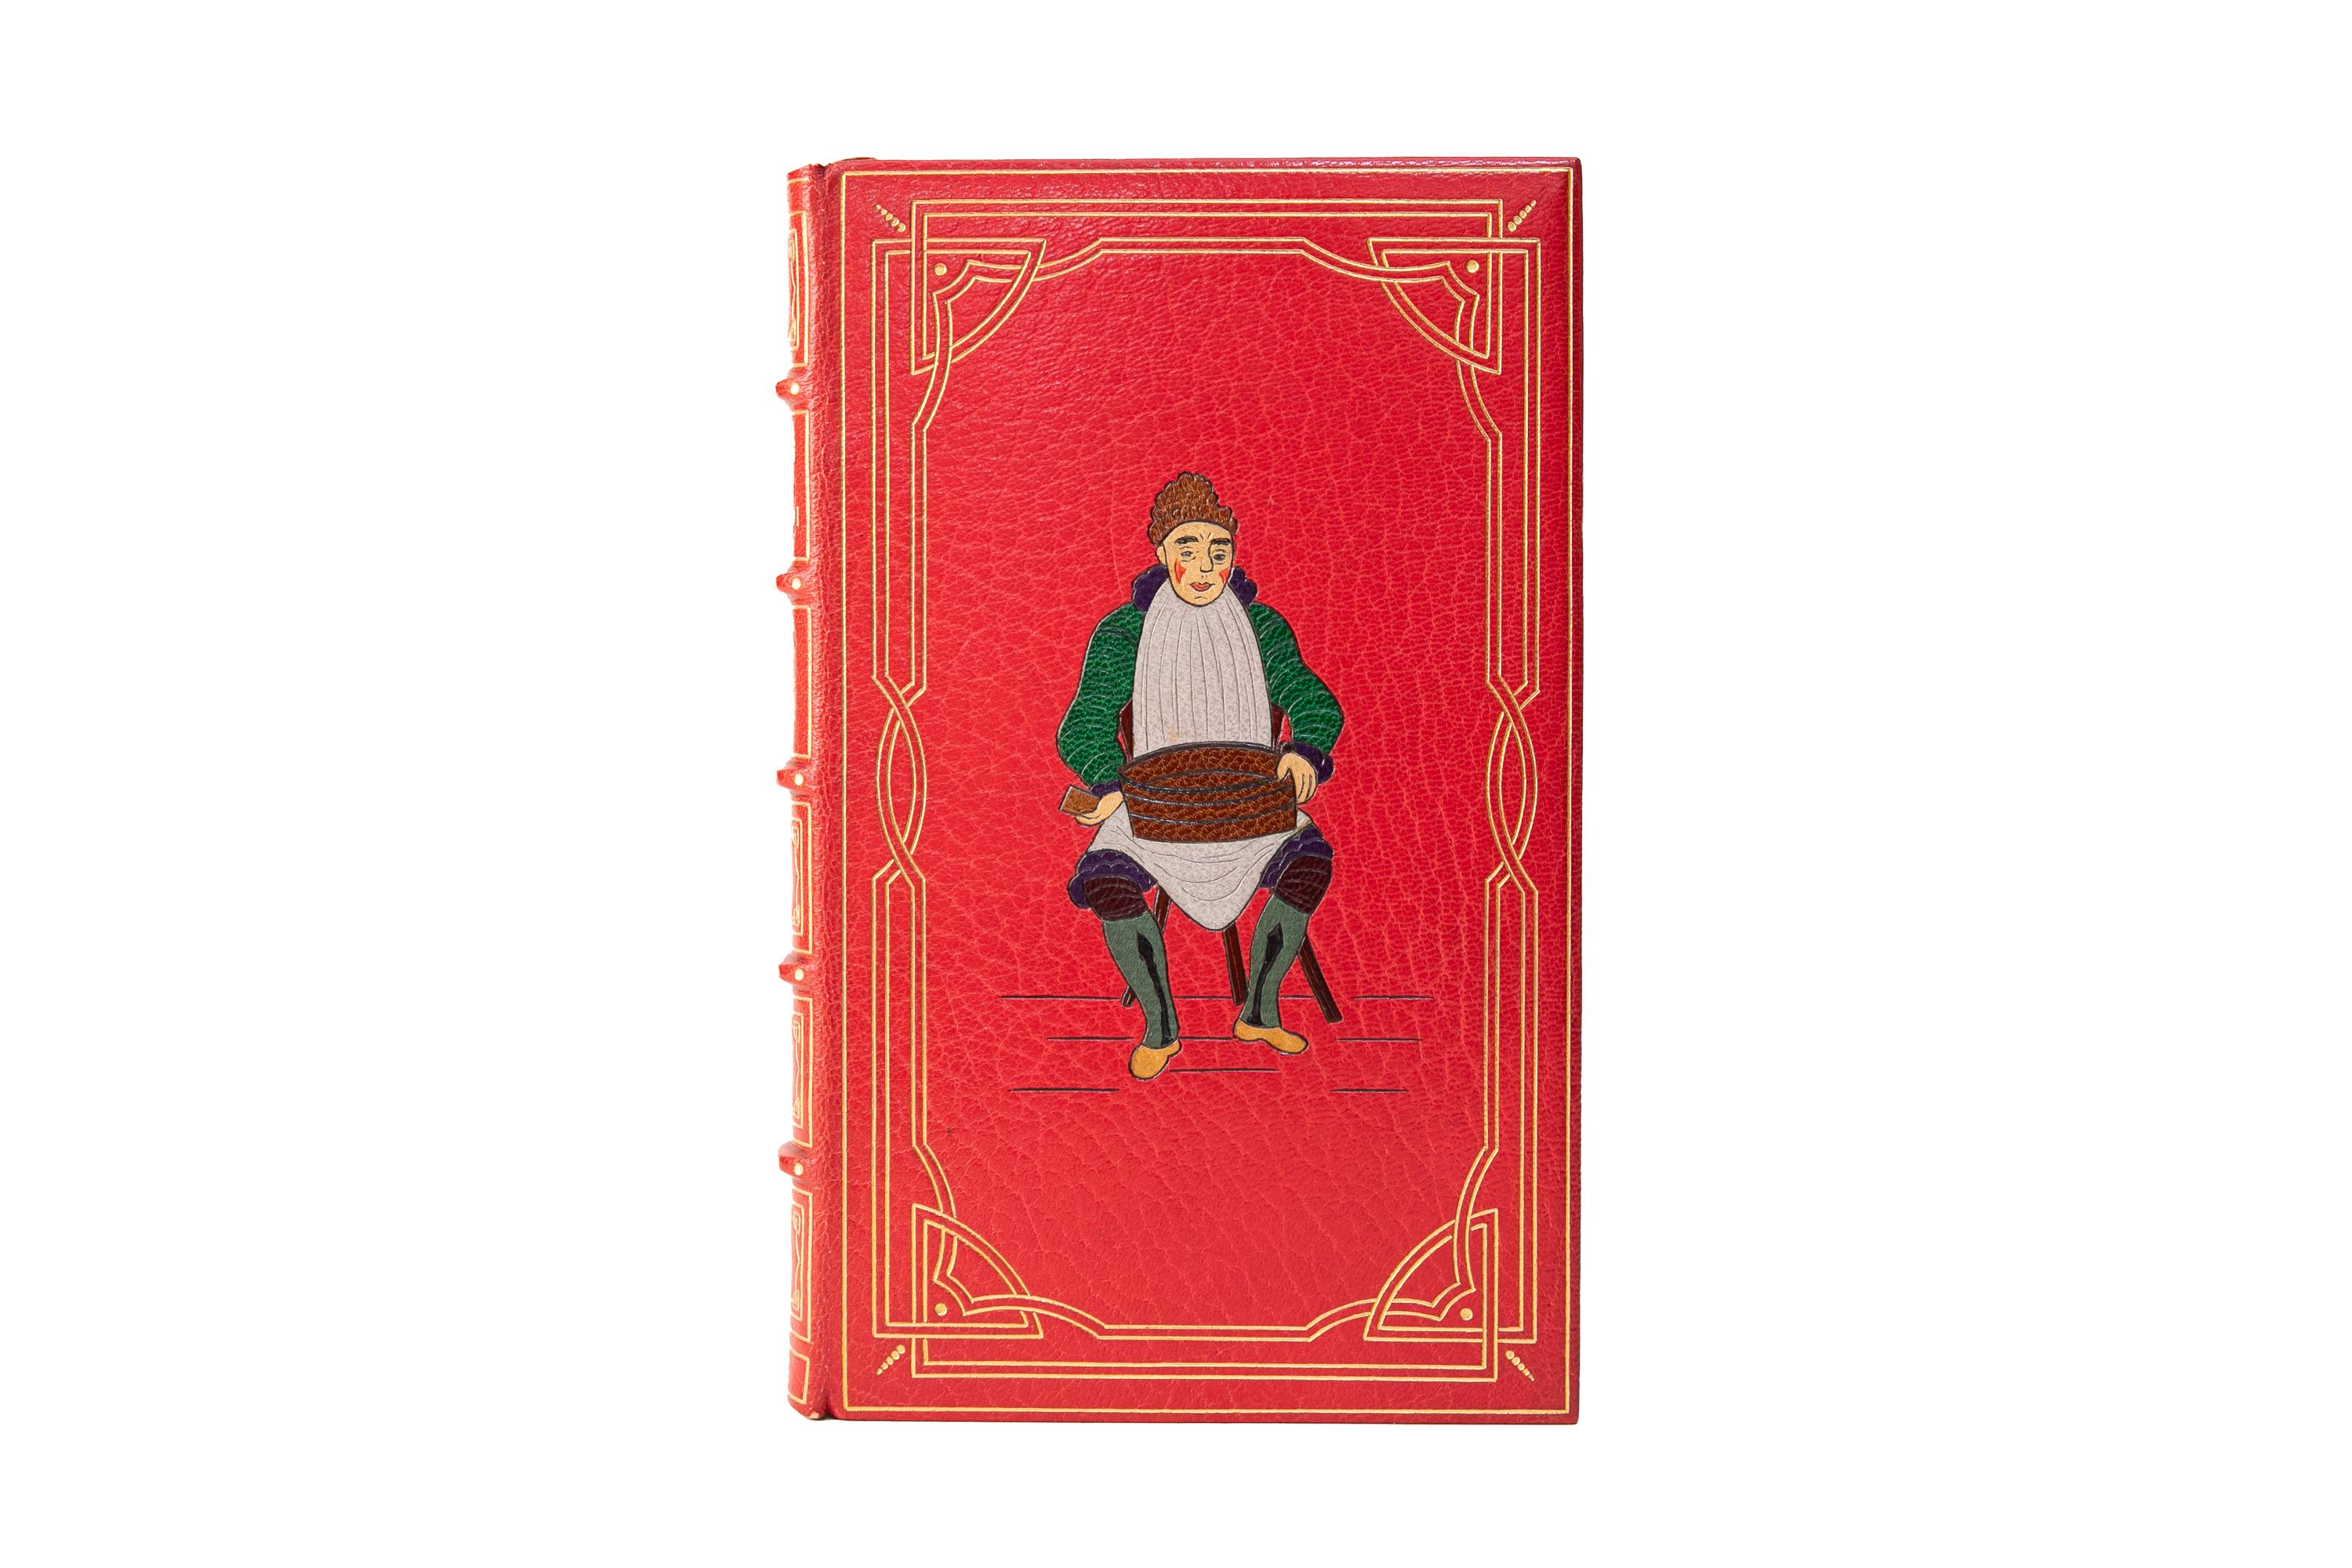 2 Volumes. Charles Dickens, Joseph Grimaldi Memoirs. First Edition. Bound by Bayntun in full red morocco with the covers displaying figures in multi-color inlay and gilt-tooled borders. The spines display gilt-tooled detailing. All of the edges are